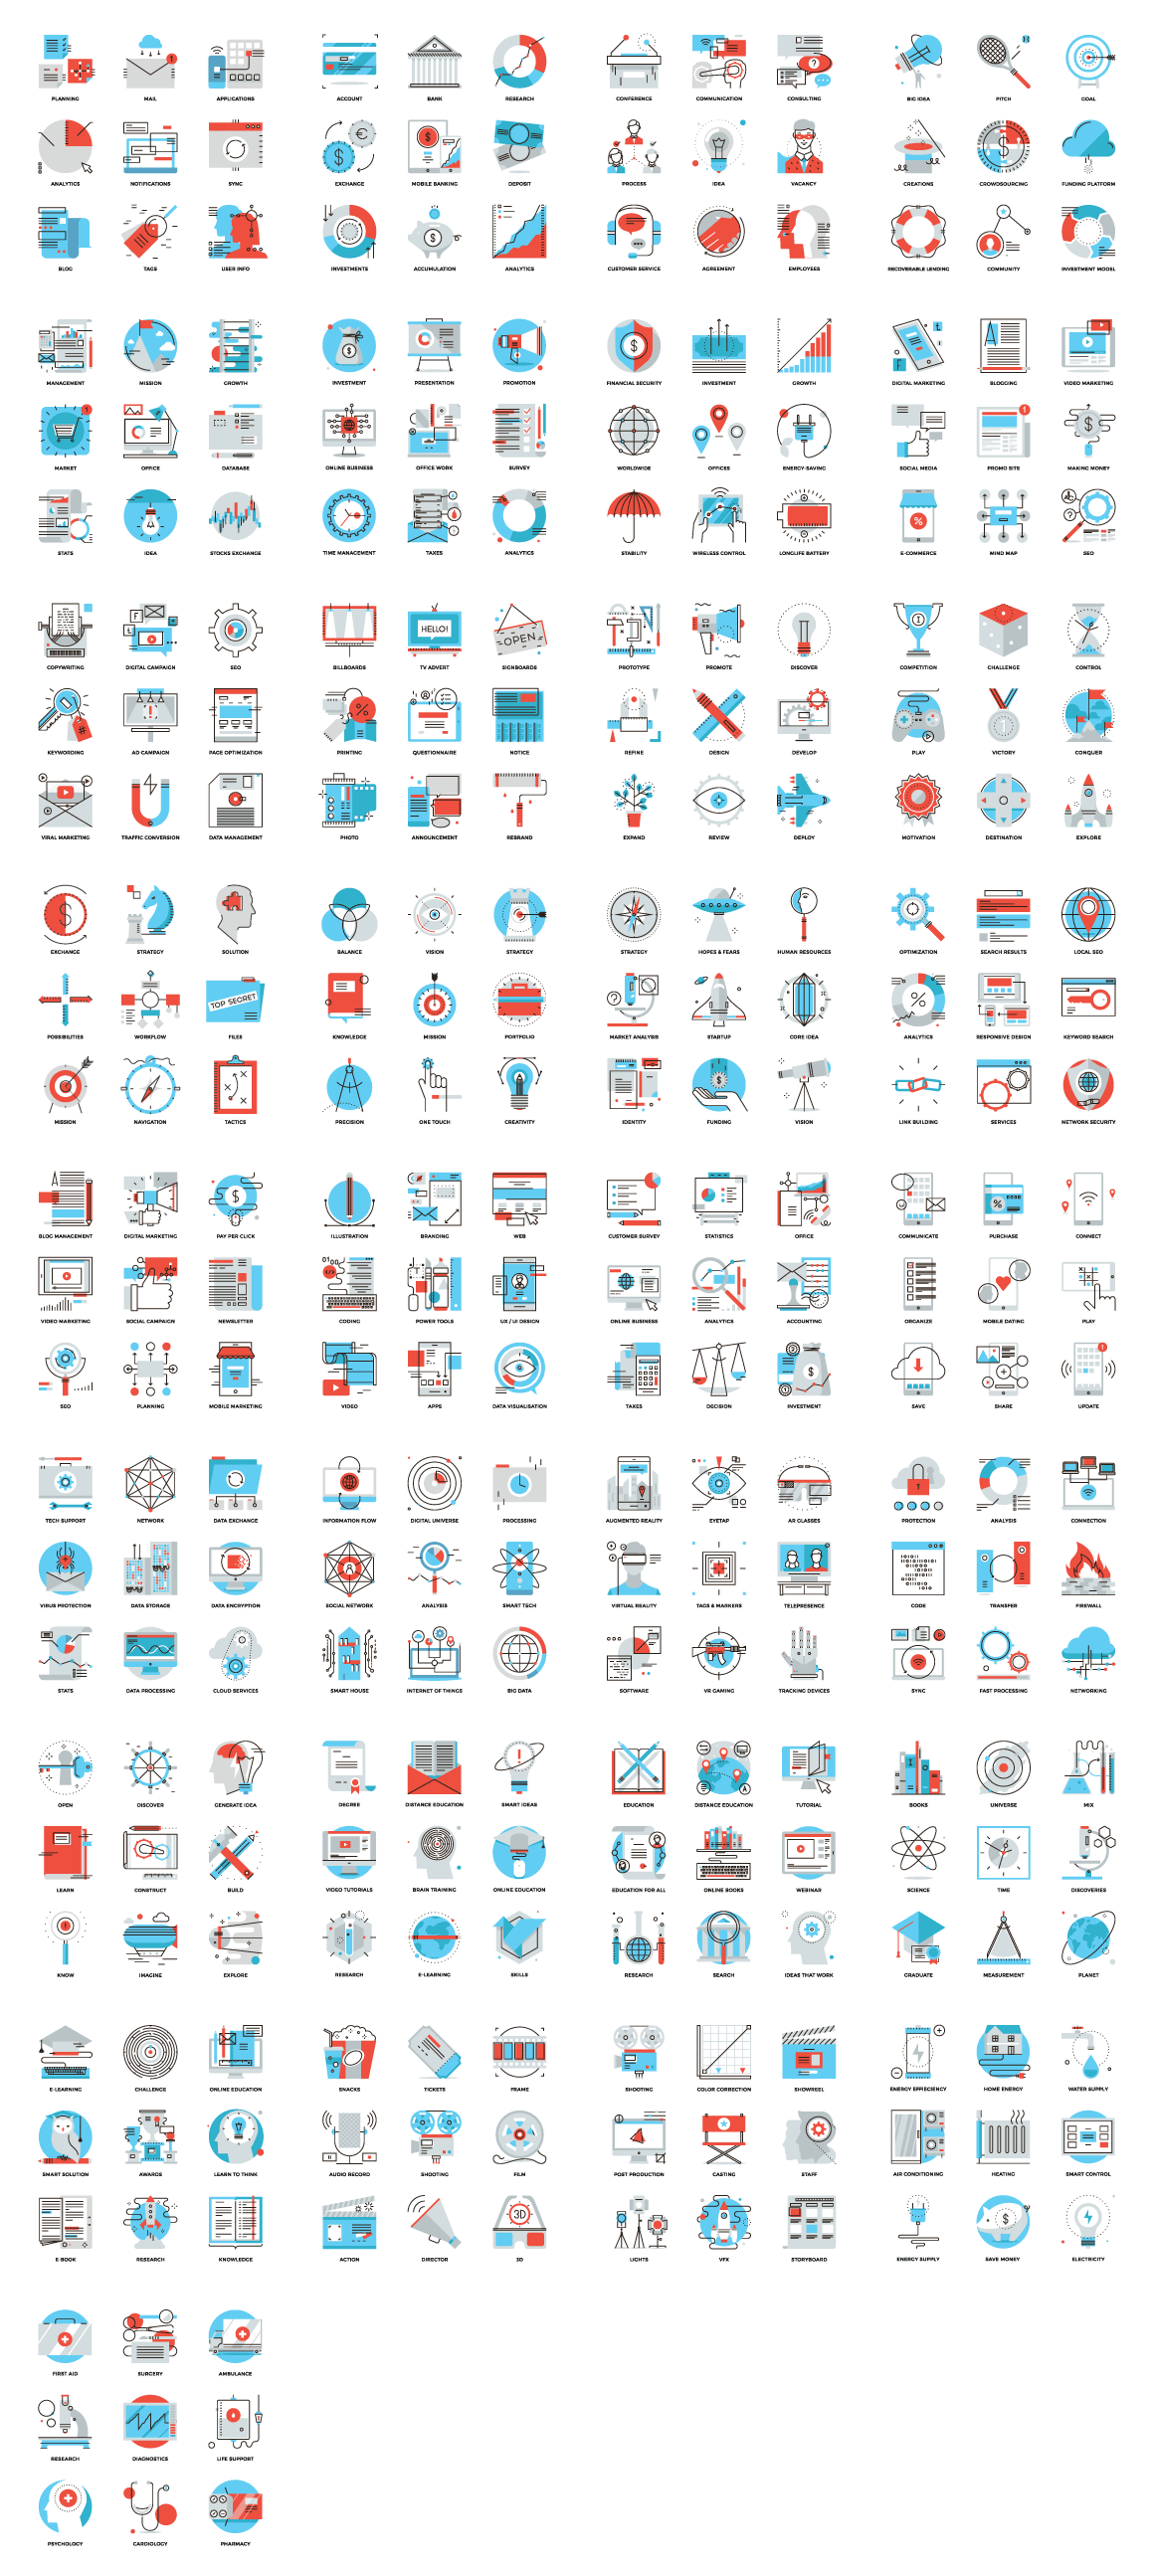 A list of all the 297 icons from diverse topics.